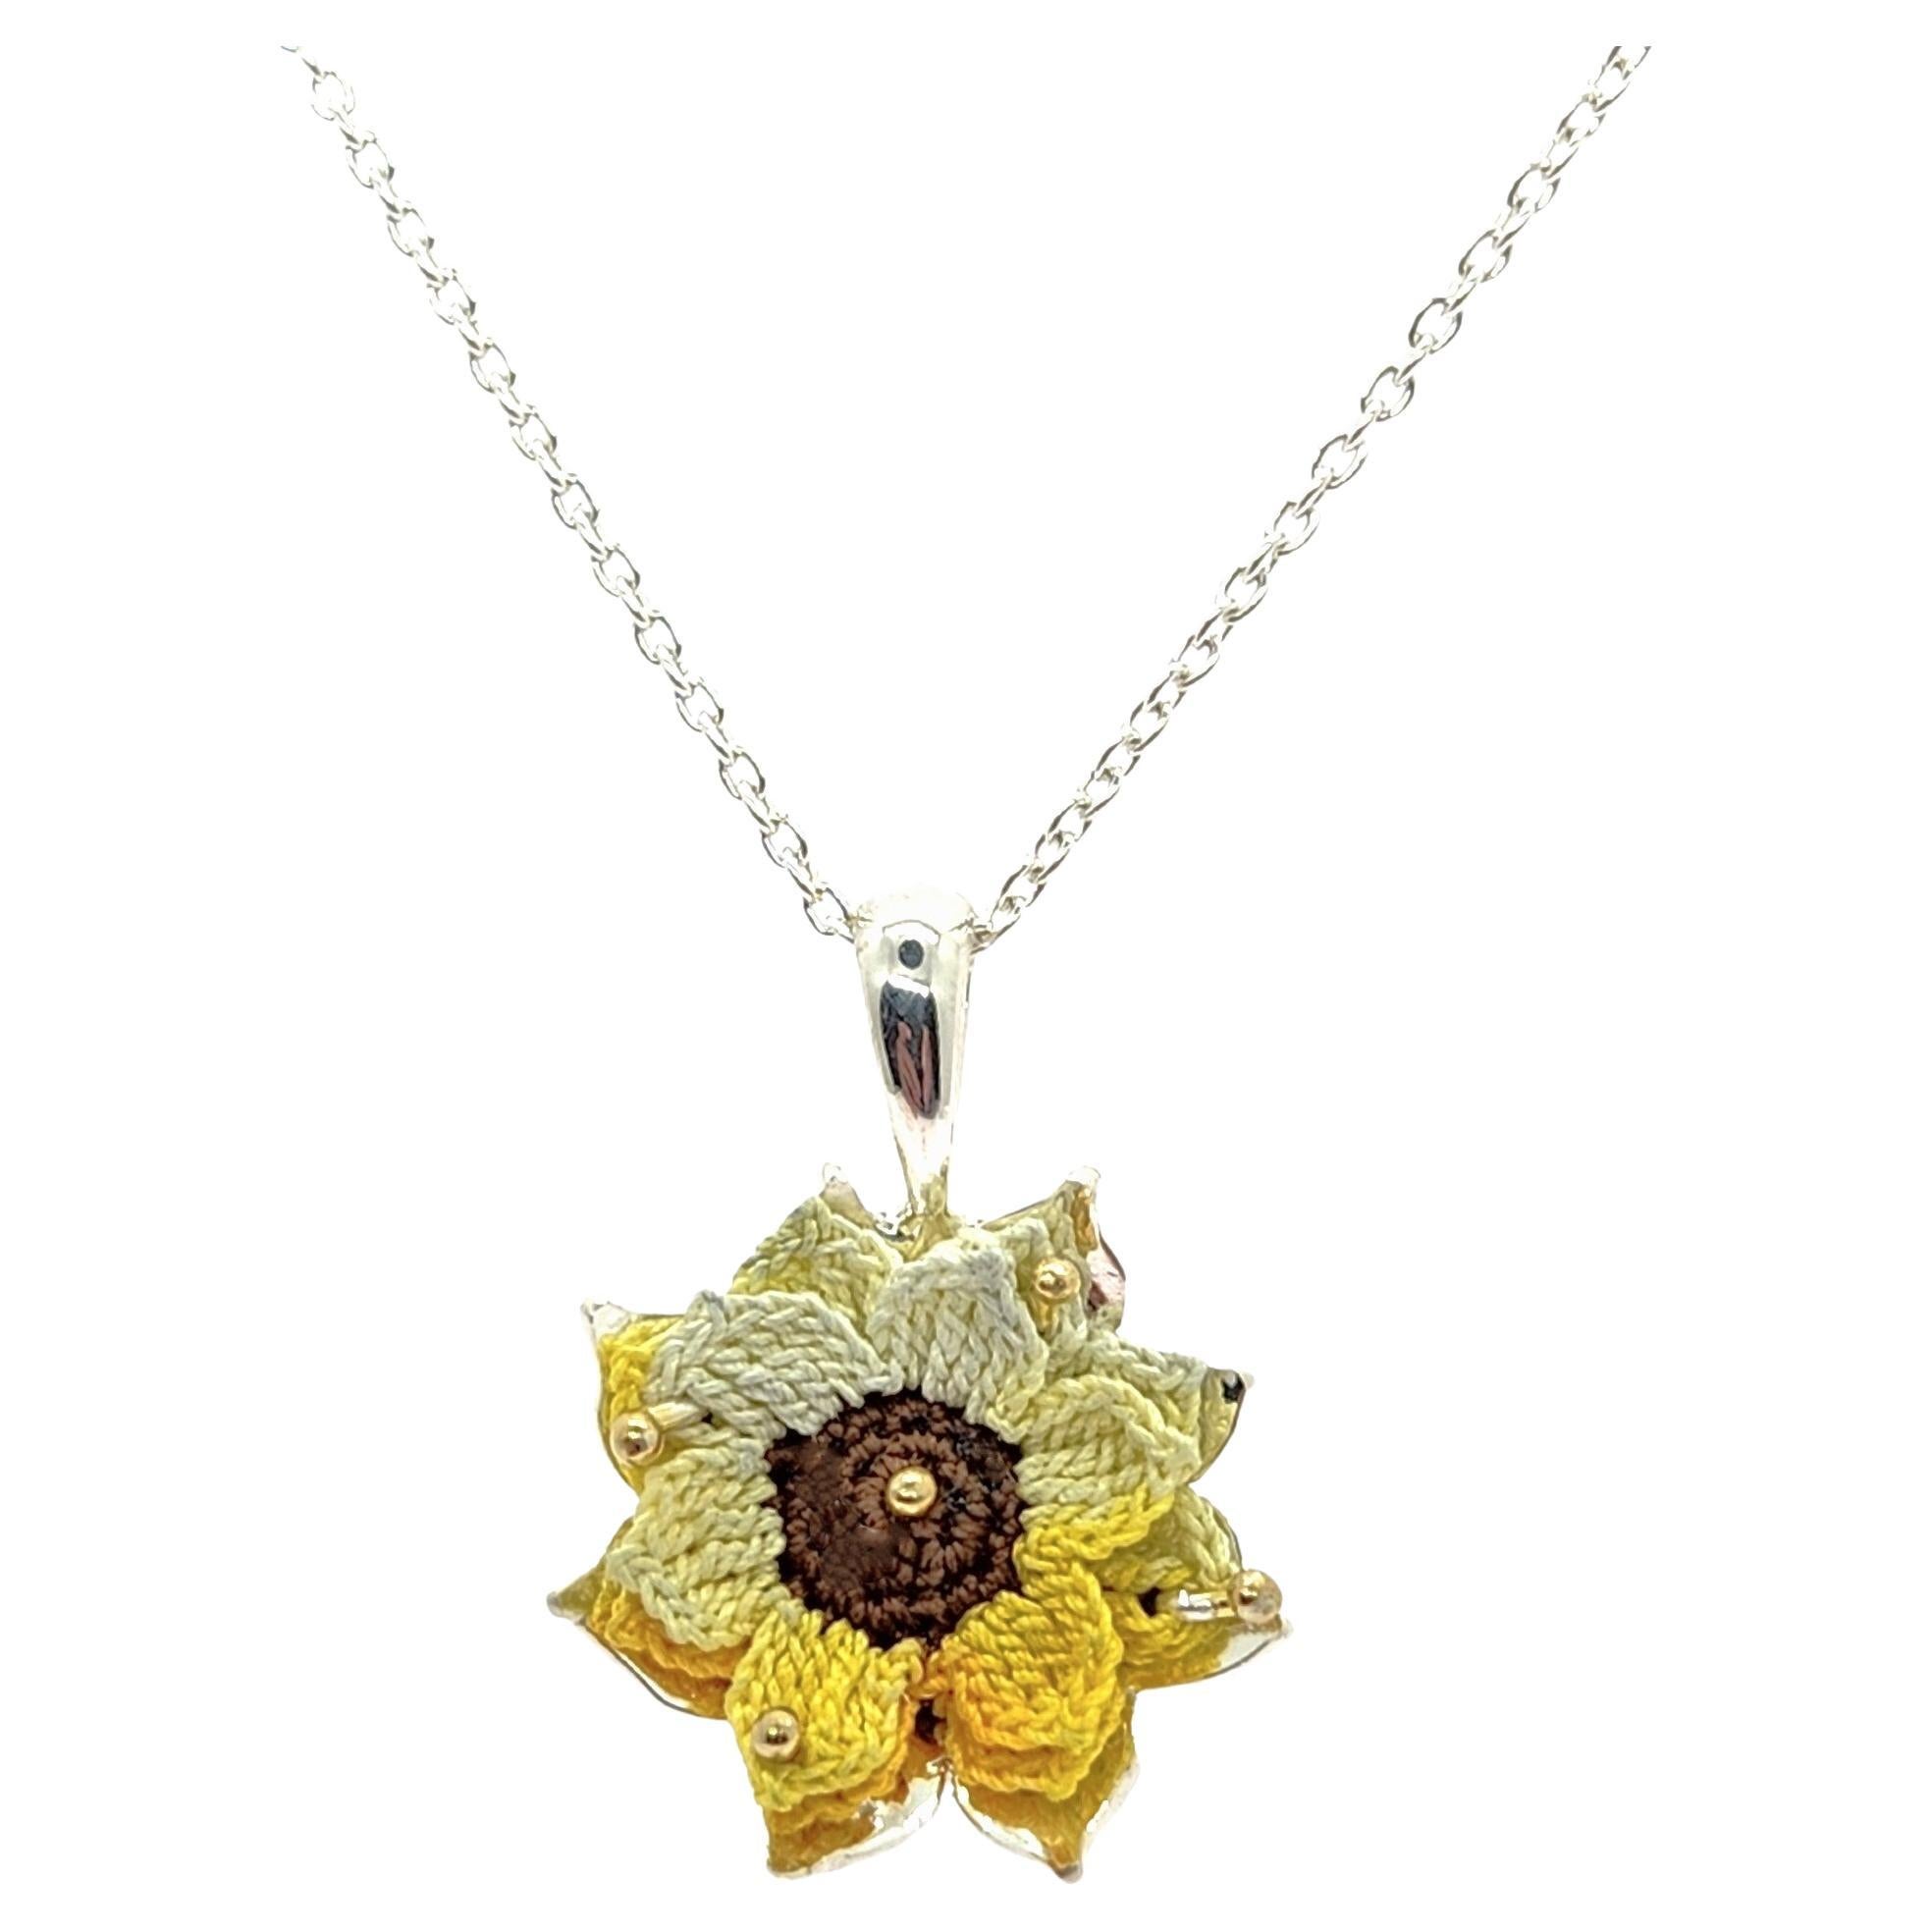 Hand Knit Flower Necklace in Handmade Sterling Silver and 14KY Gold Setting #1 For Sale